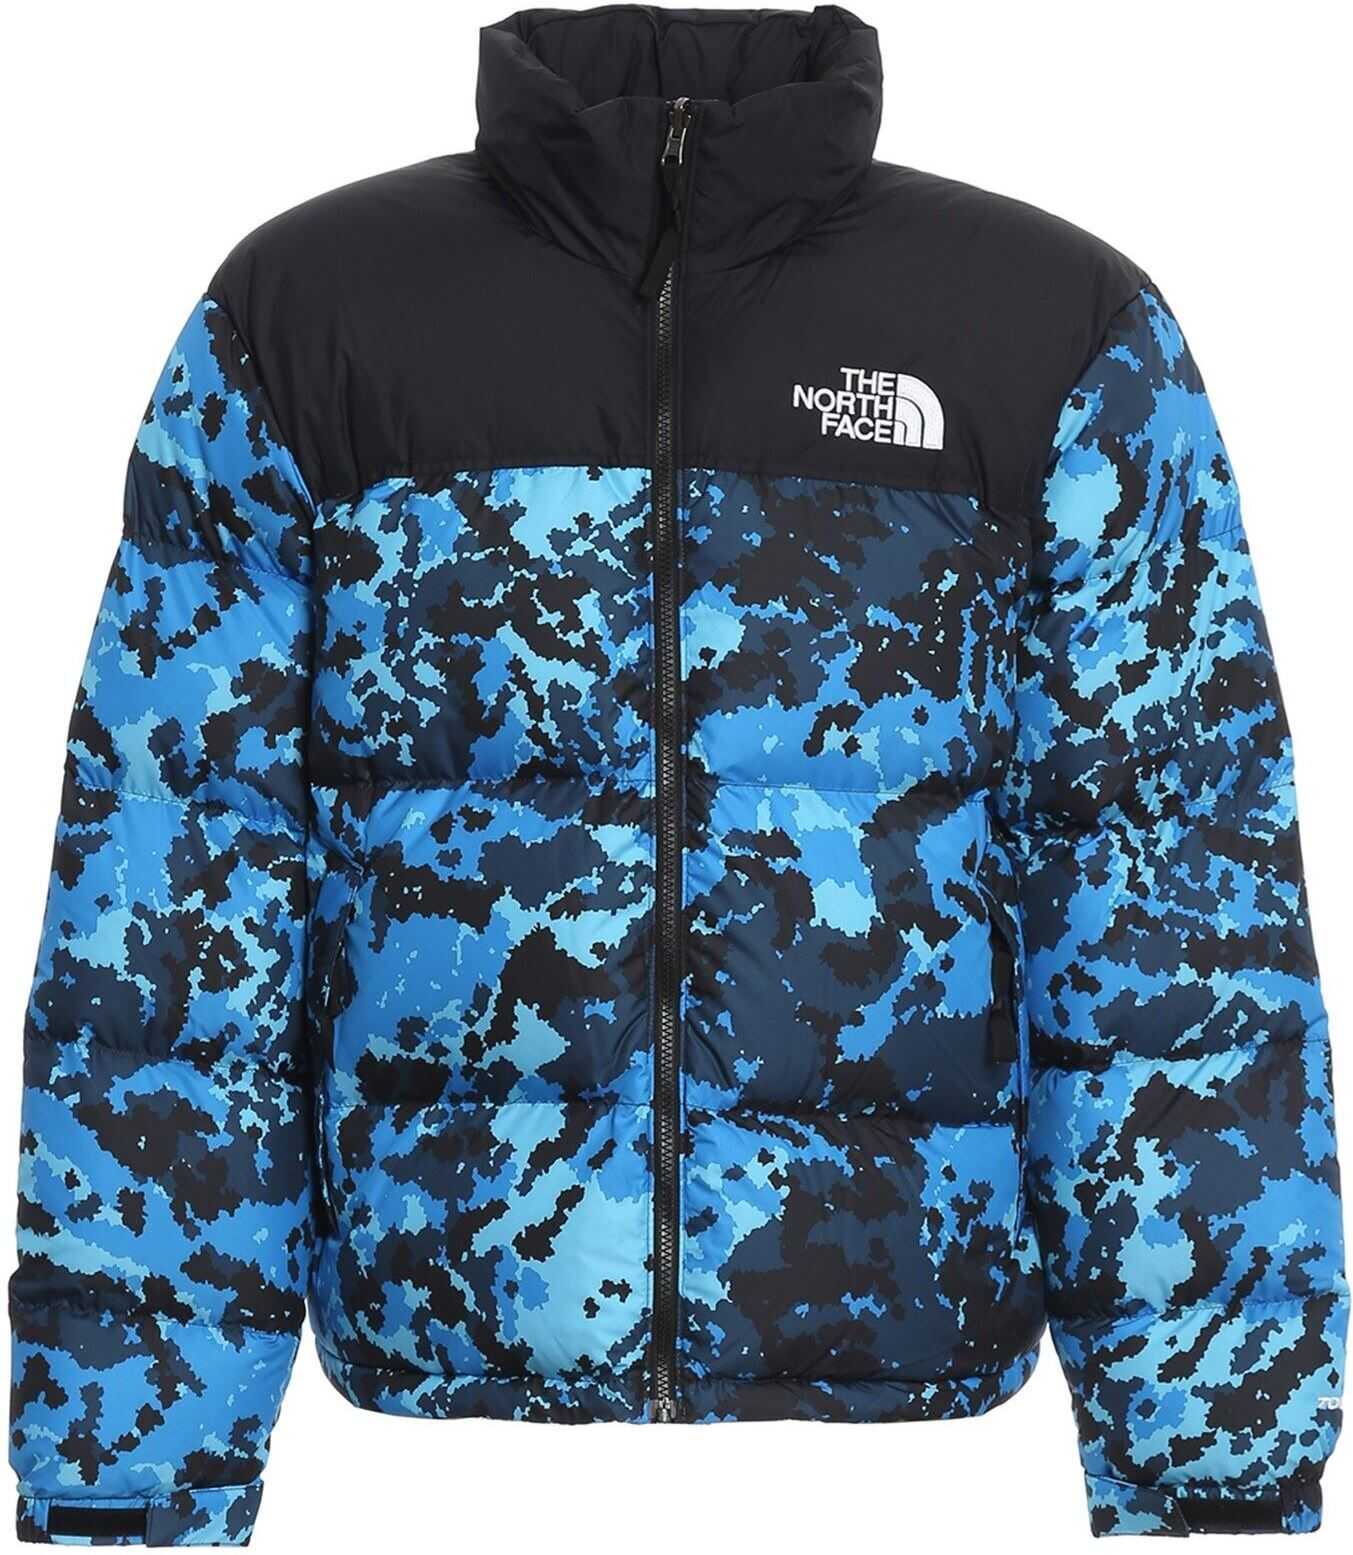 The North Face 1996 Retro Nuptuse Puffer Jacket In Blue Blue